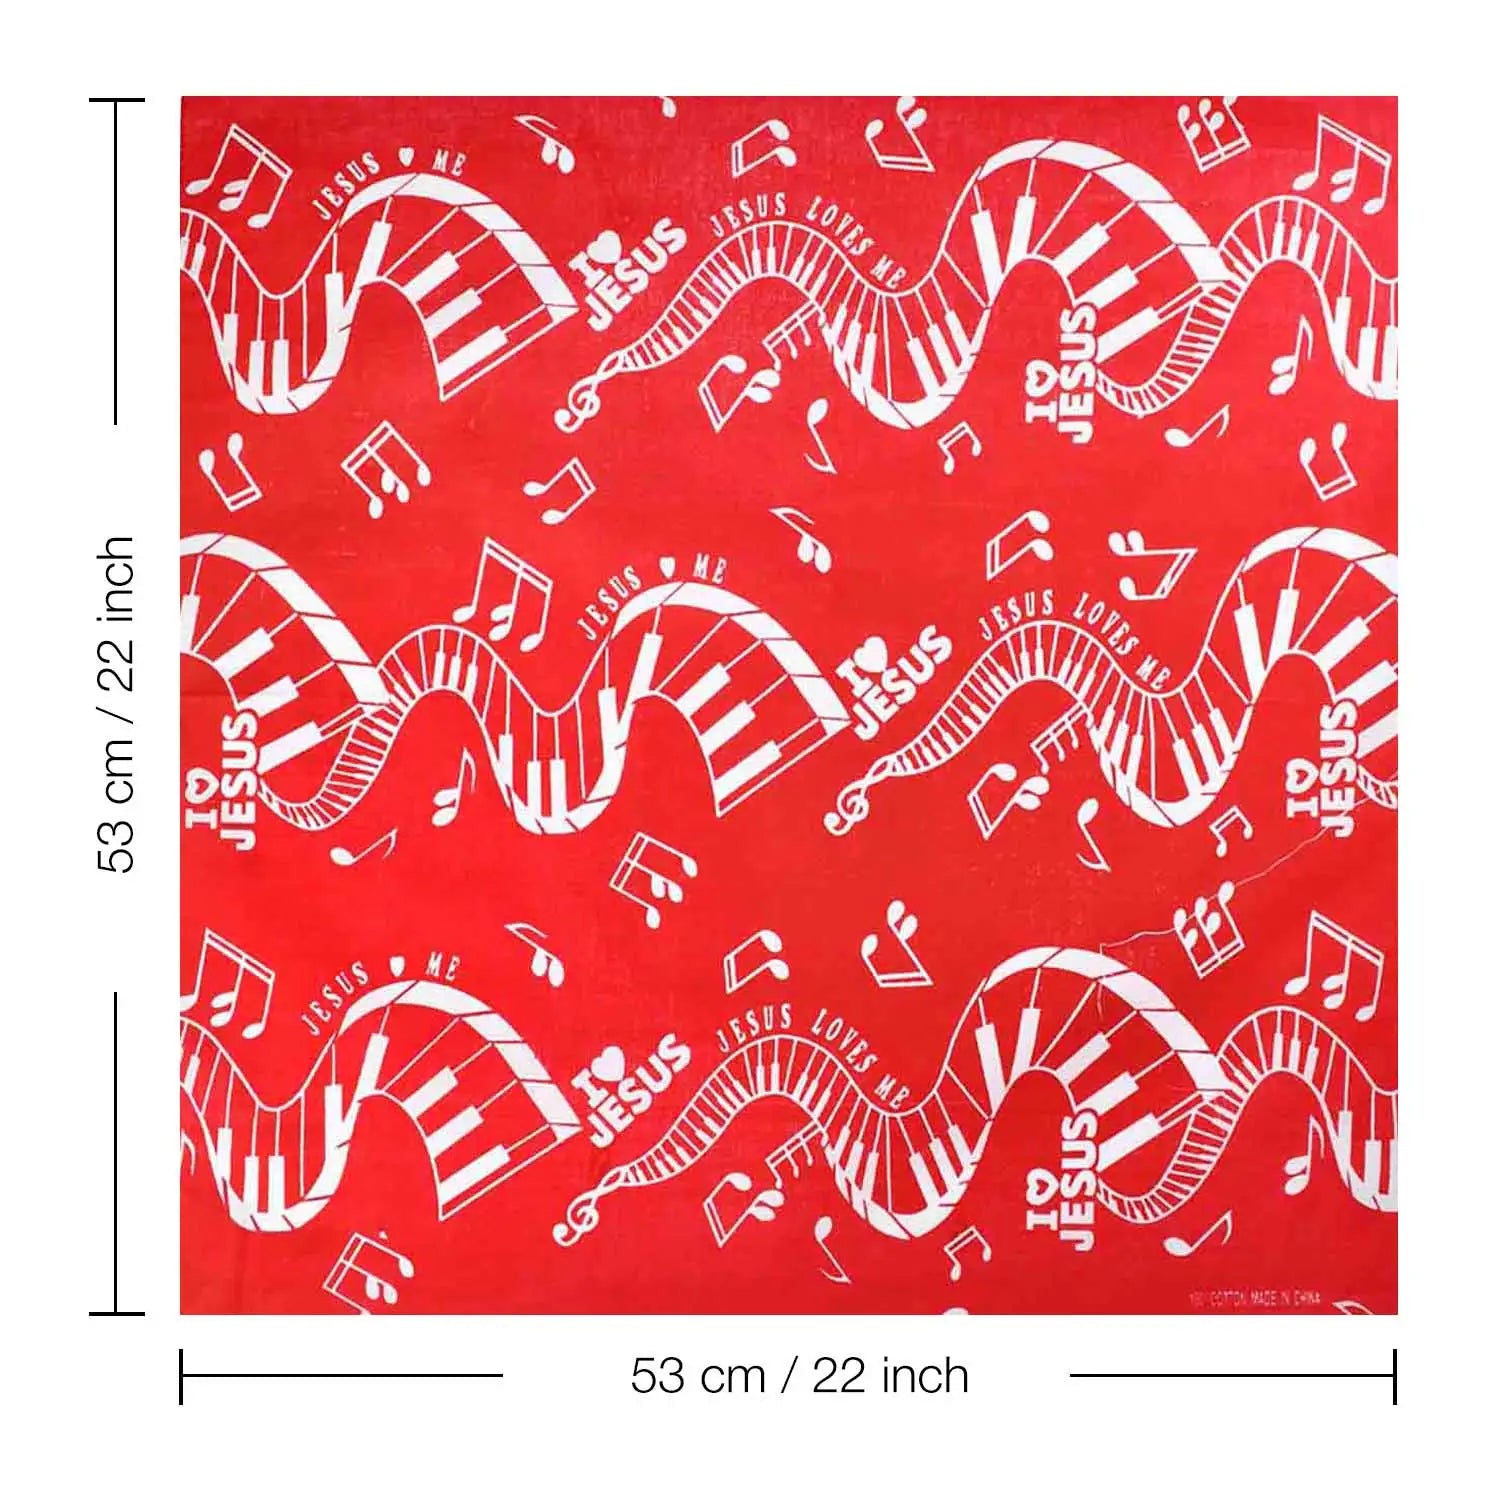 Red and white abstract pattern on a red background showcased in the 4-Piece Musical Clef Note Cotton Bandana Set.